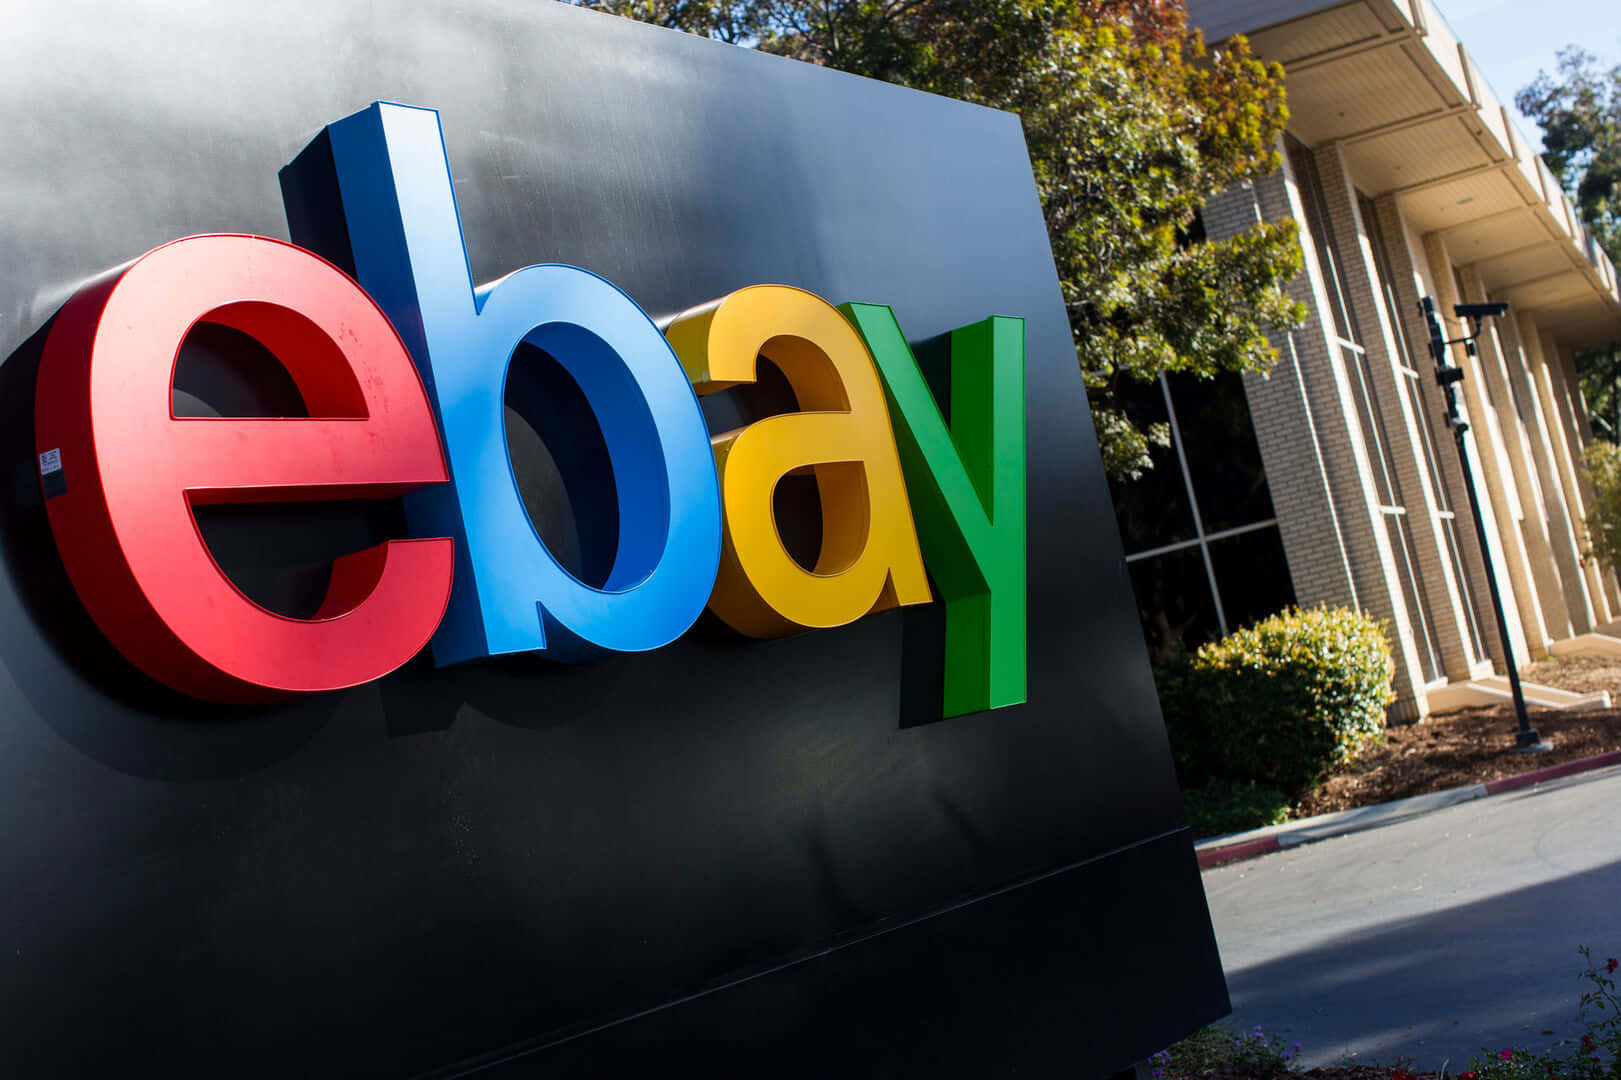 Shop the latest deals on eBay